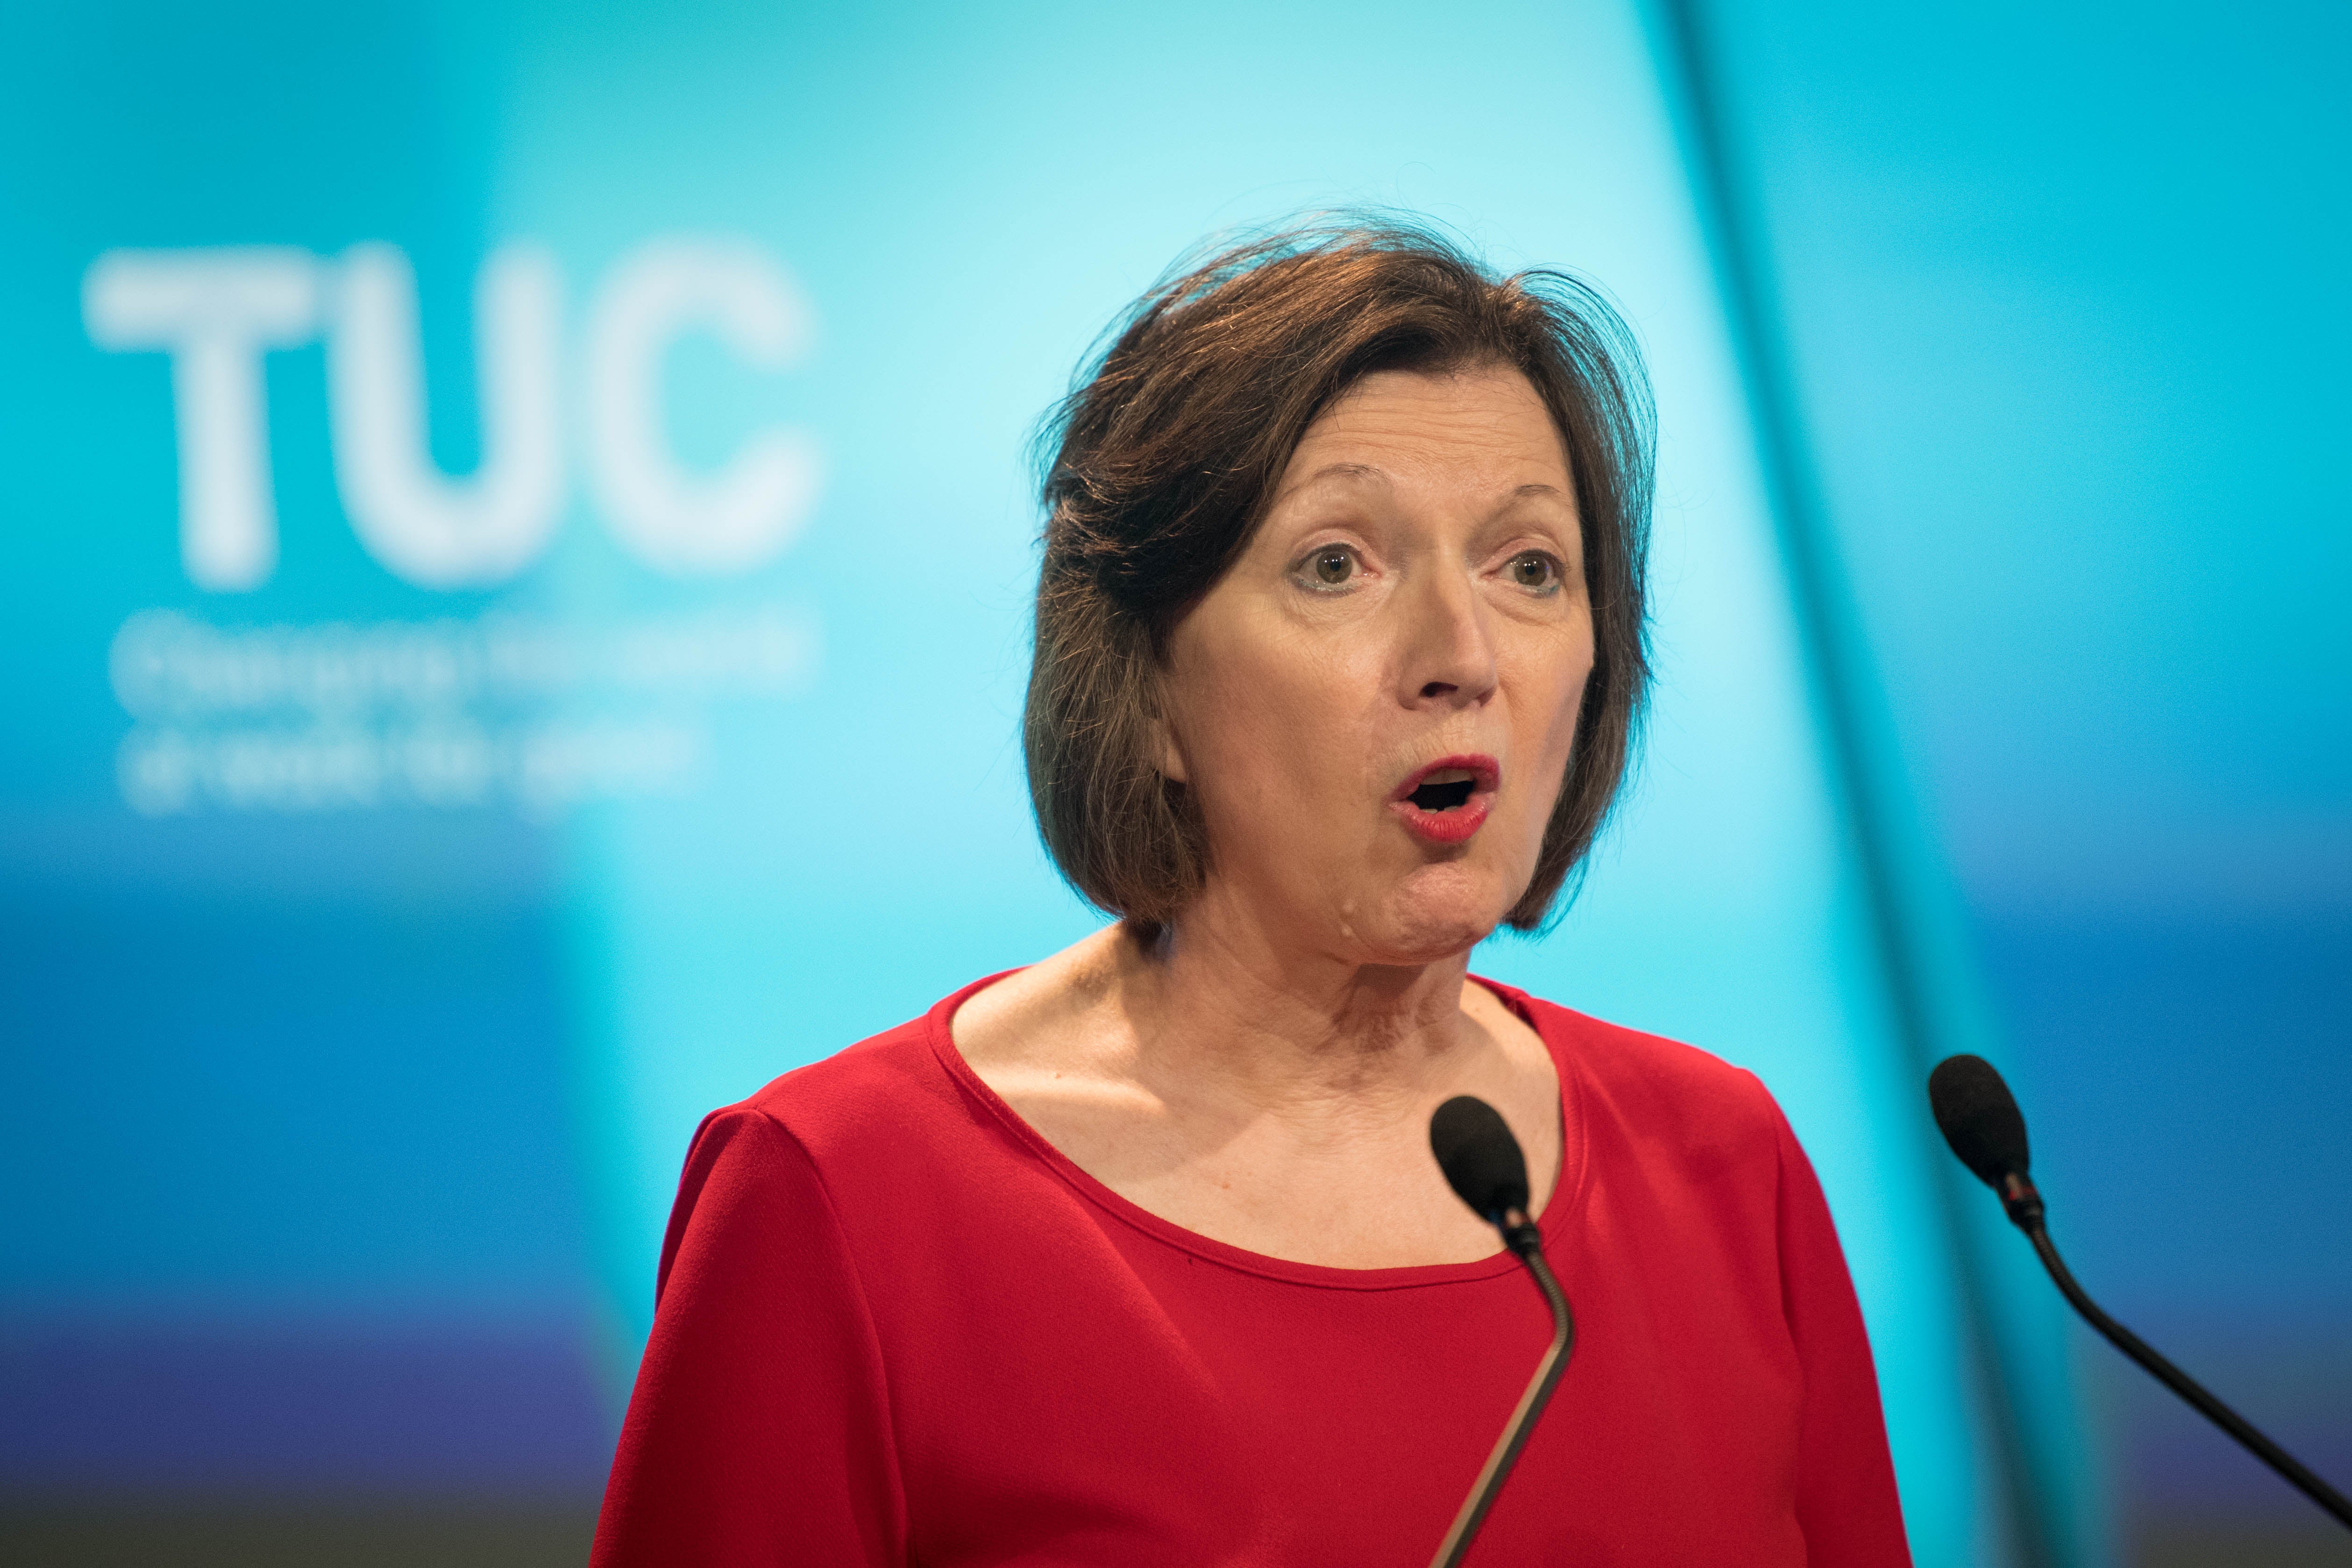 TUC general secretary Frances O’Grady has highlighted the plight of female workers during the pandemic